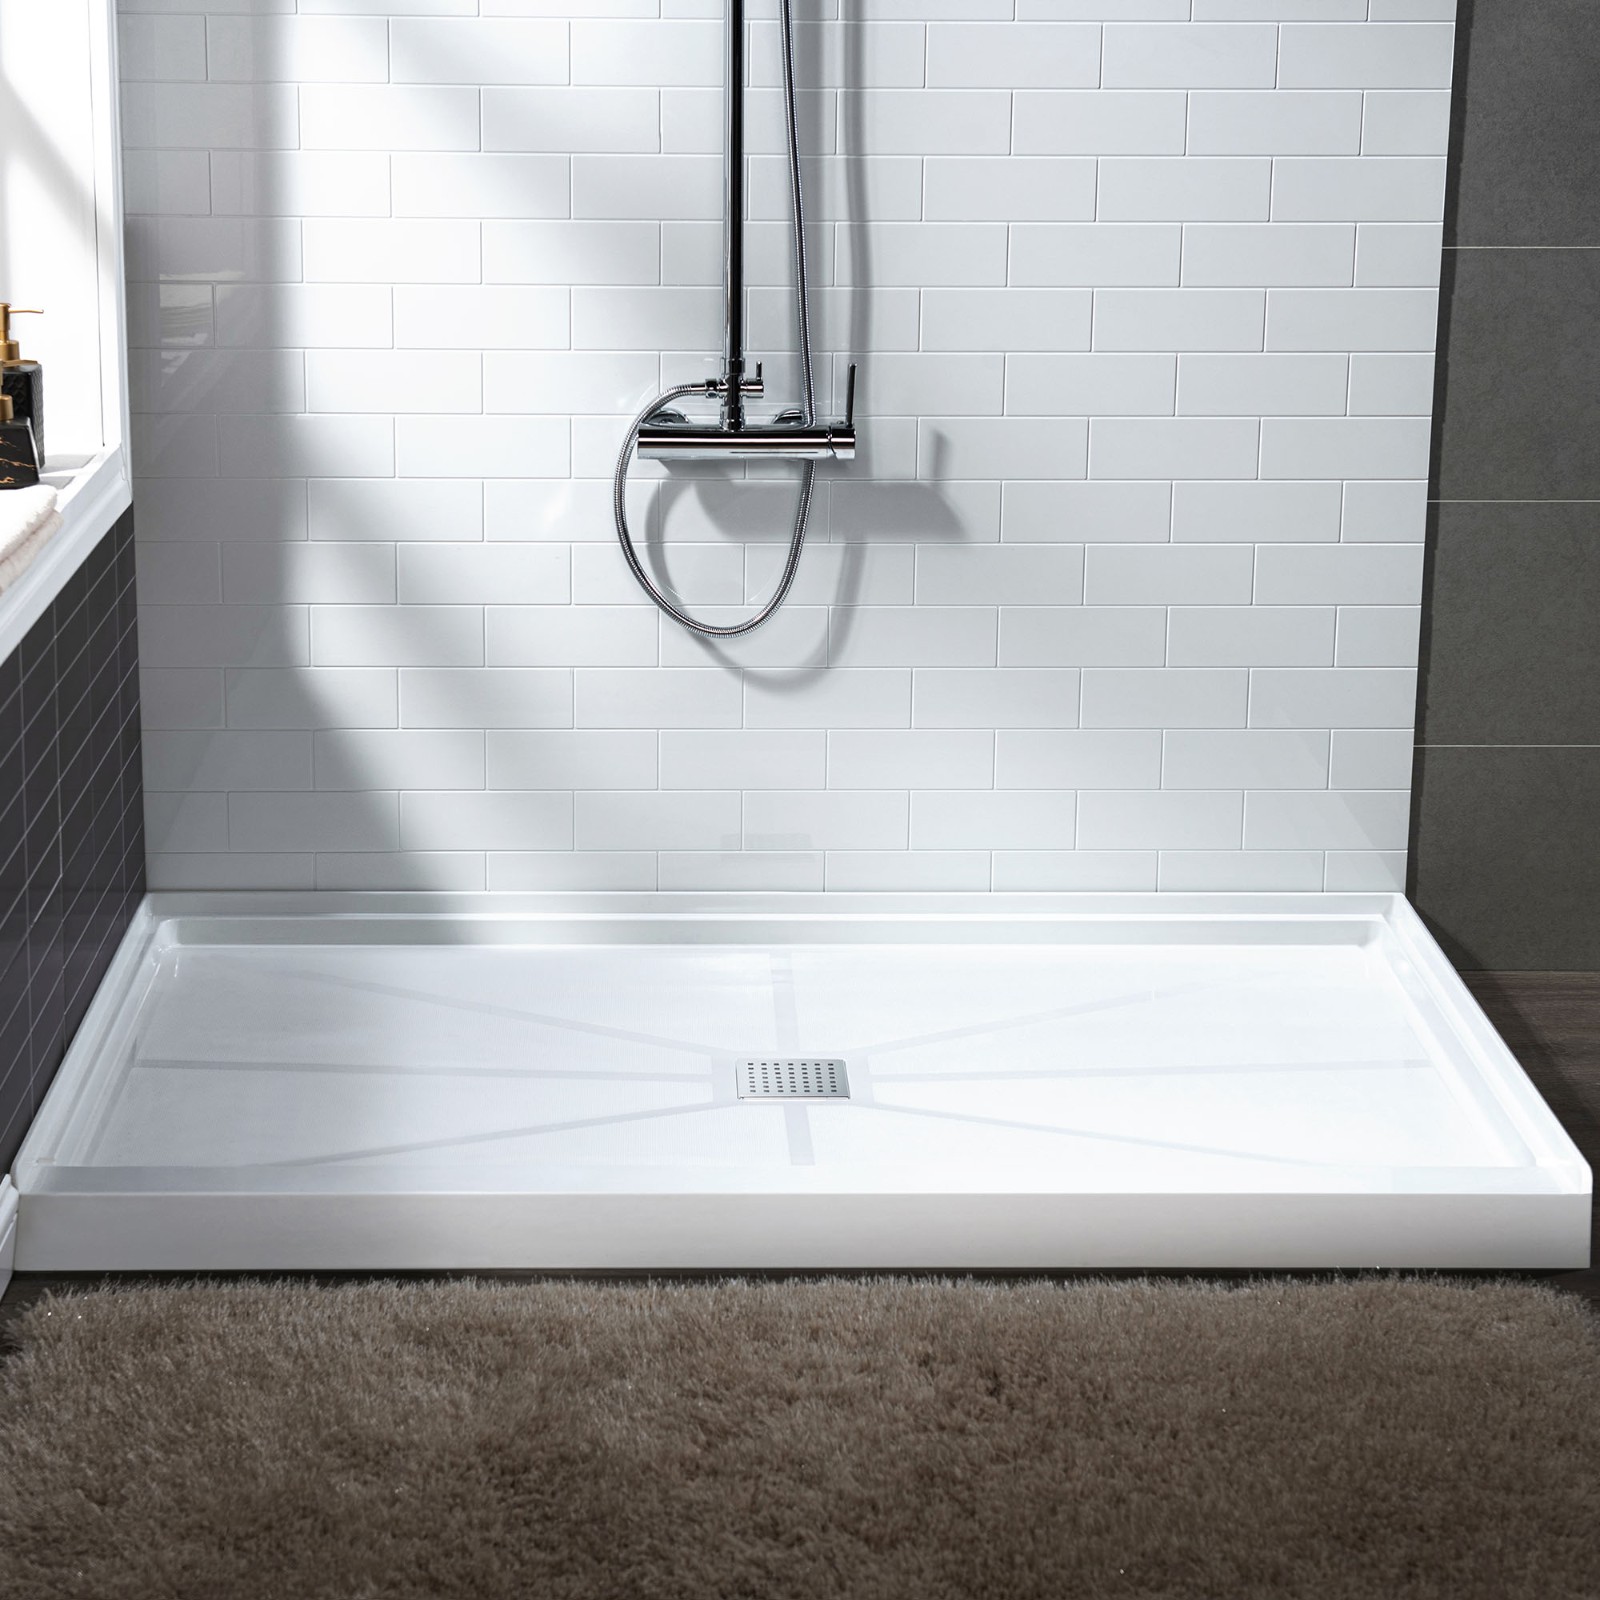  WOODBRIDGE SBR6034-1000C-CH SolidSurface Shower Base with Recessed Trench Side Including  Chrome Linear Cover, 60